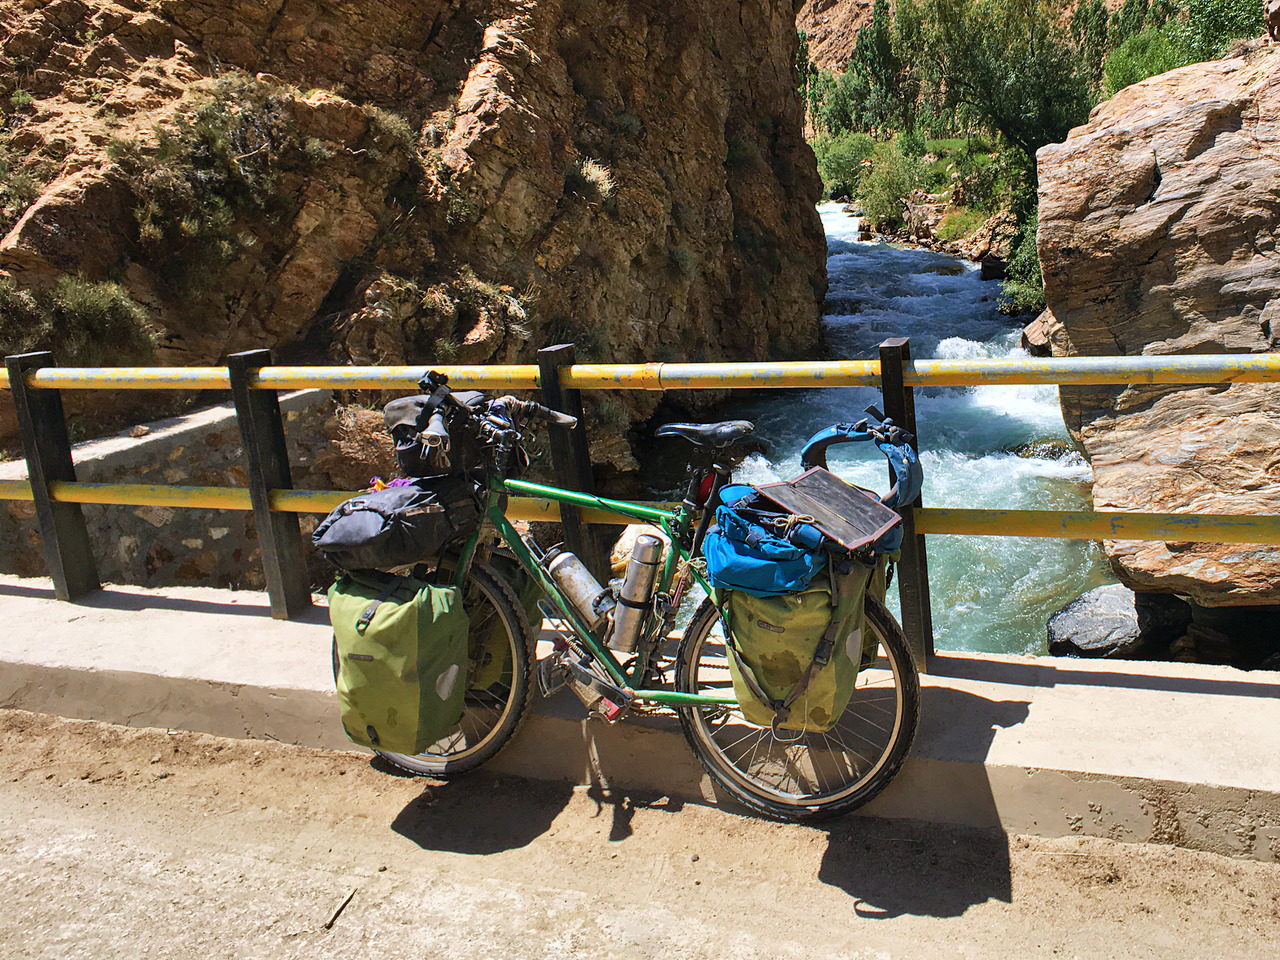 My fully loaded bicycle in the beginning of the adventure